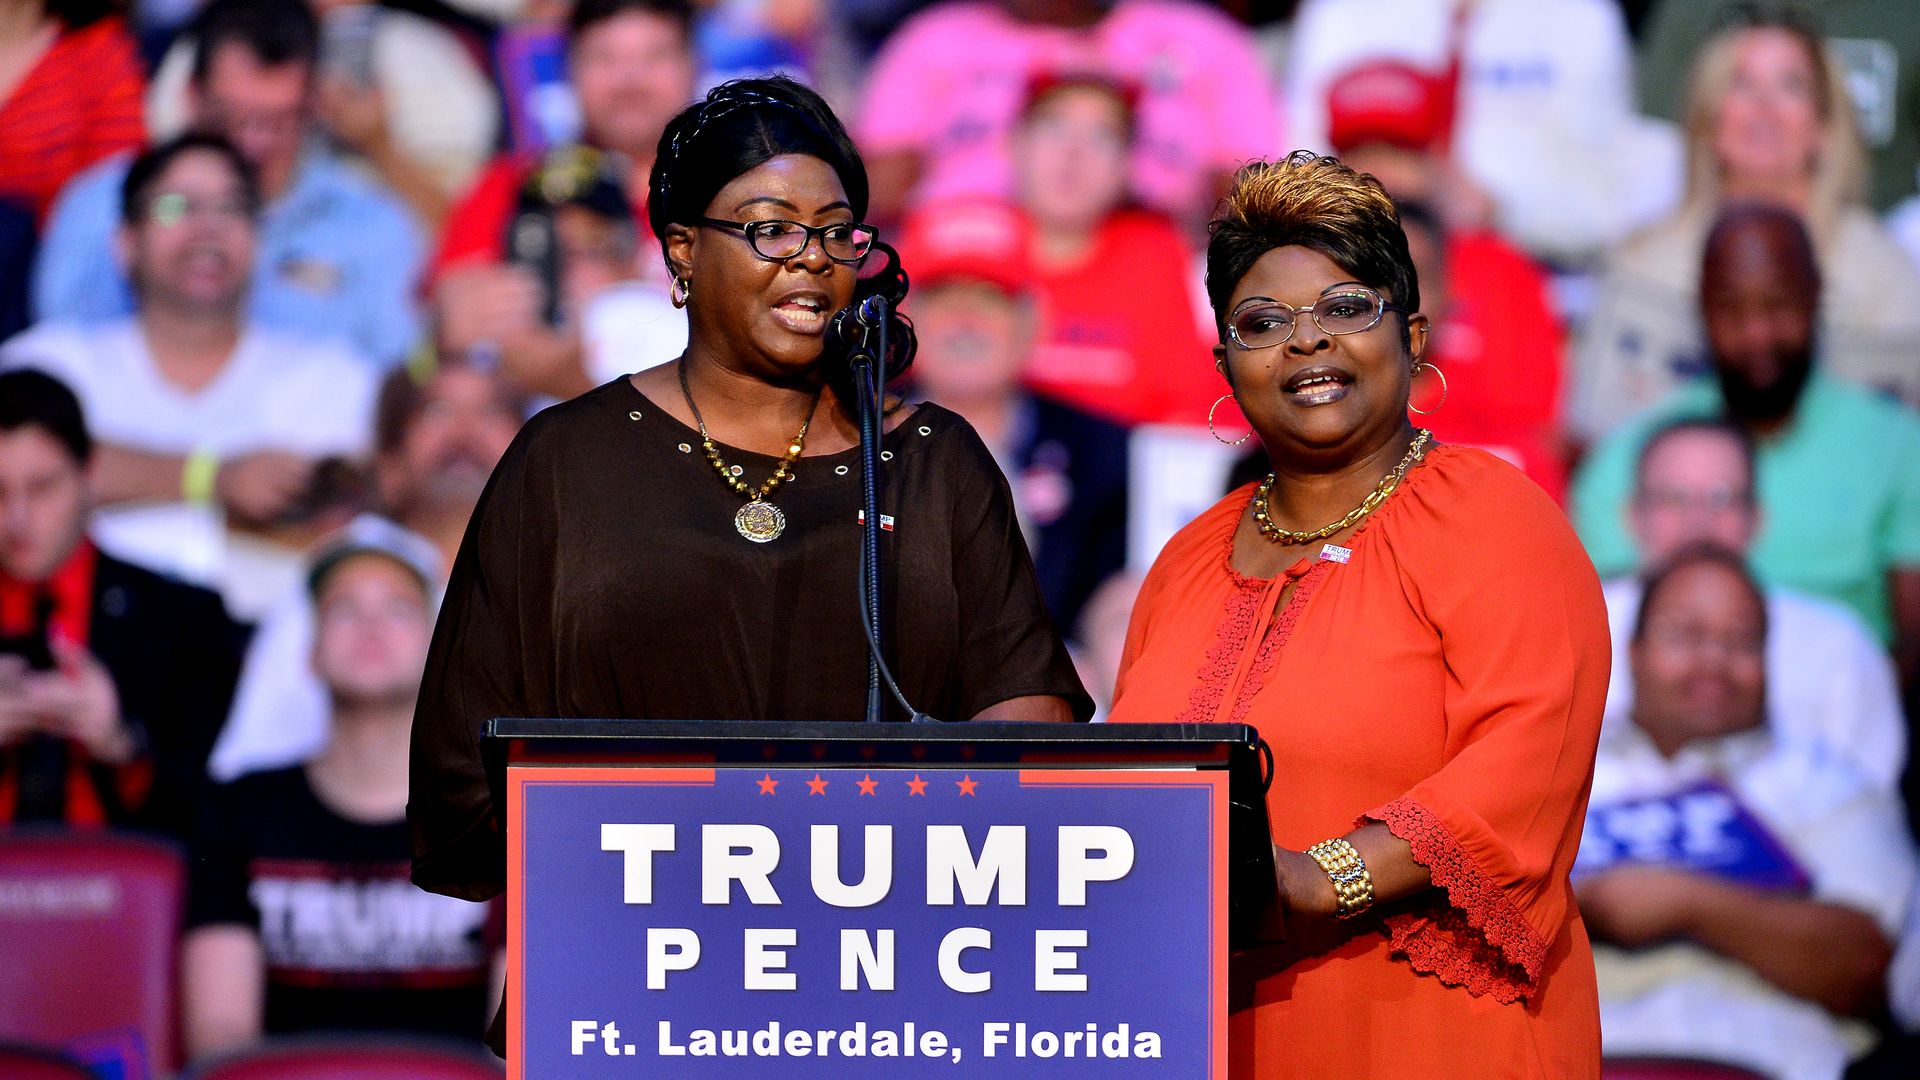 Diamond and Silk speak on stage at a Trump rally